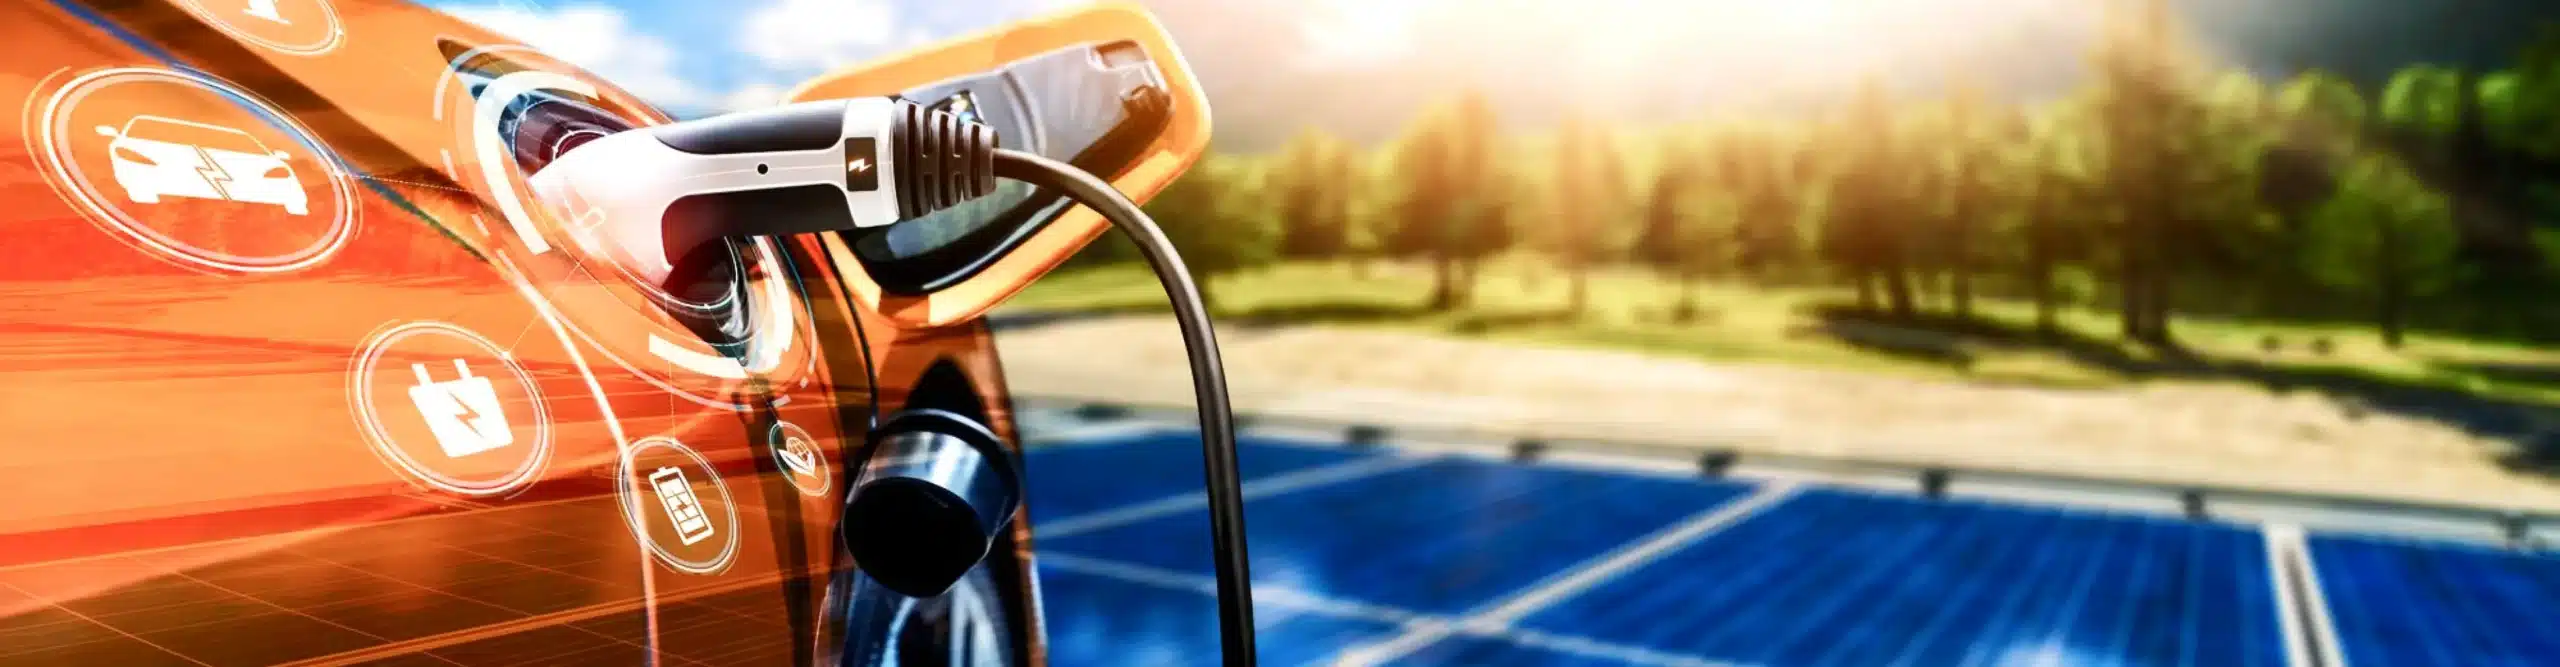 EV Charging Costs in Australia: How to Save with Solar Panels